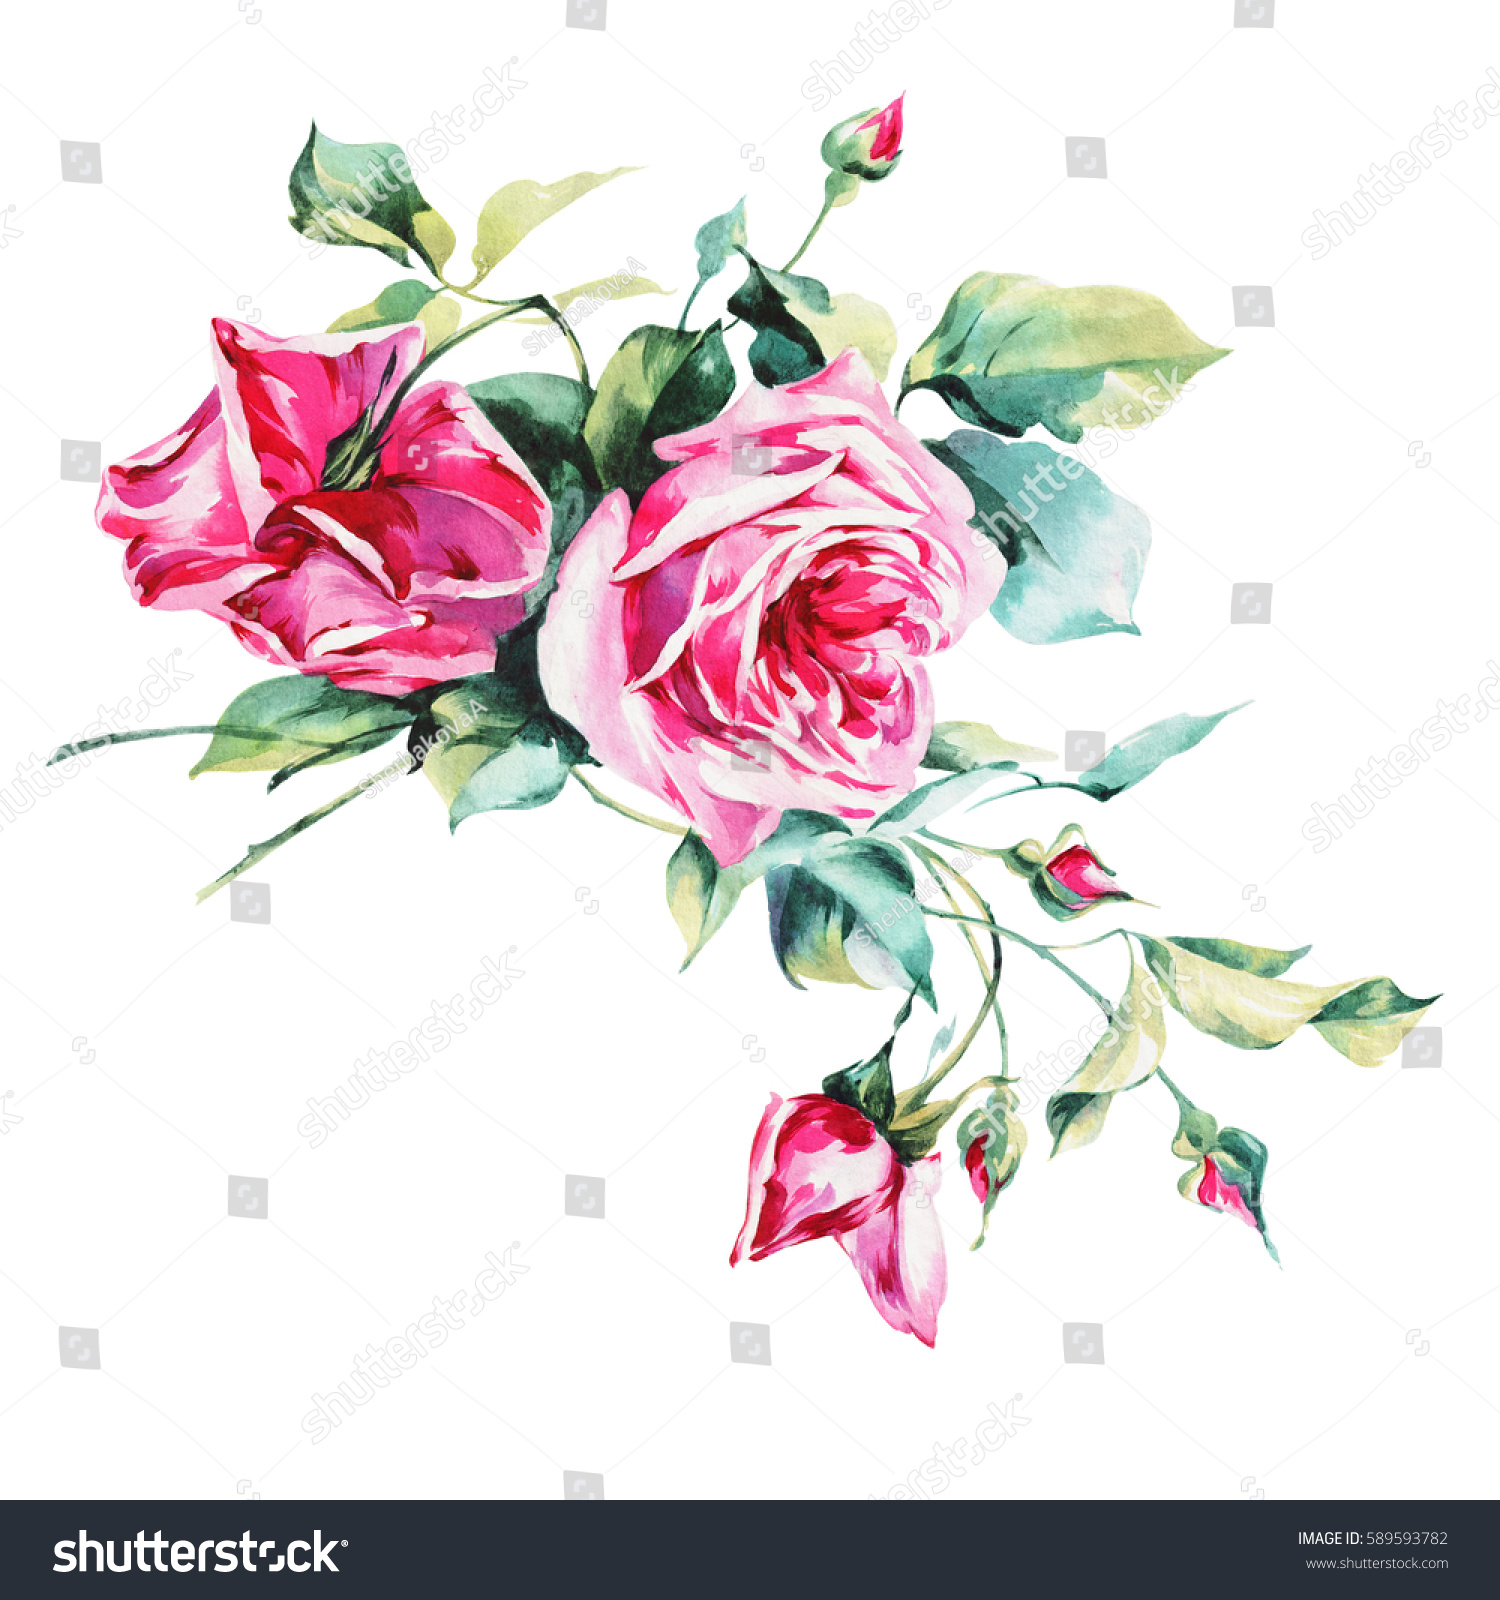 Watercolor Roses Bunch Roses On White Stock Illustration 589593782 ...